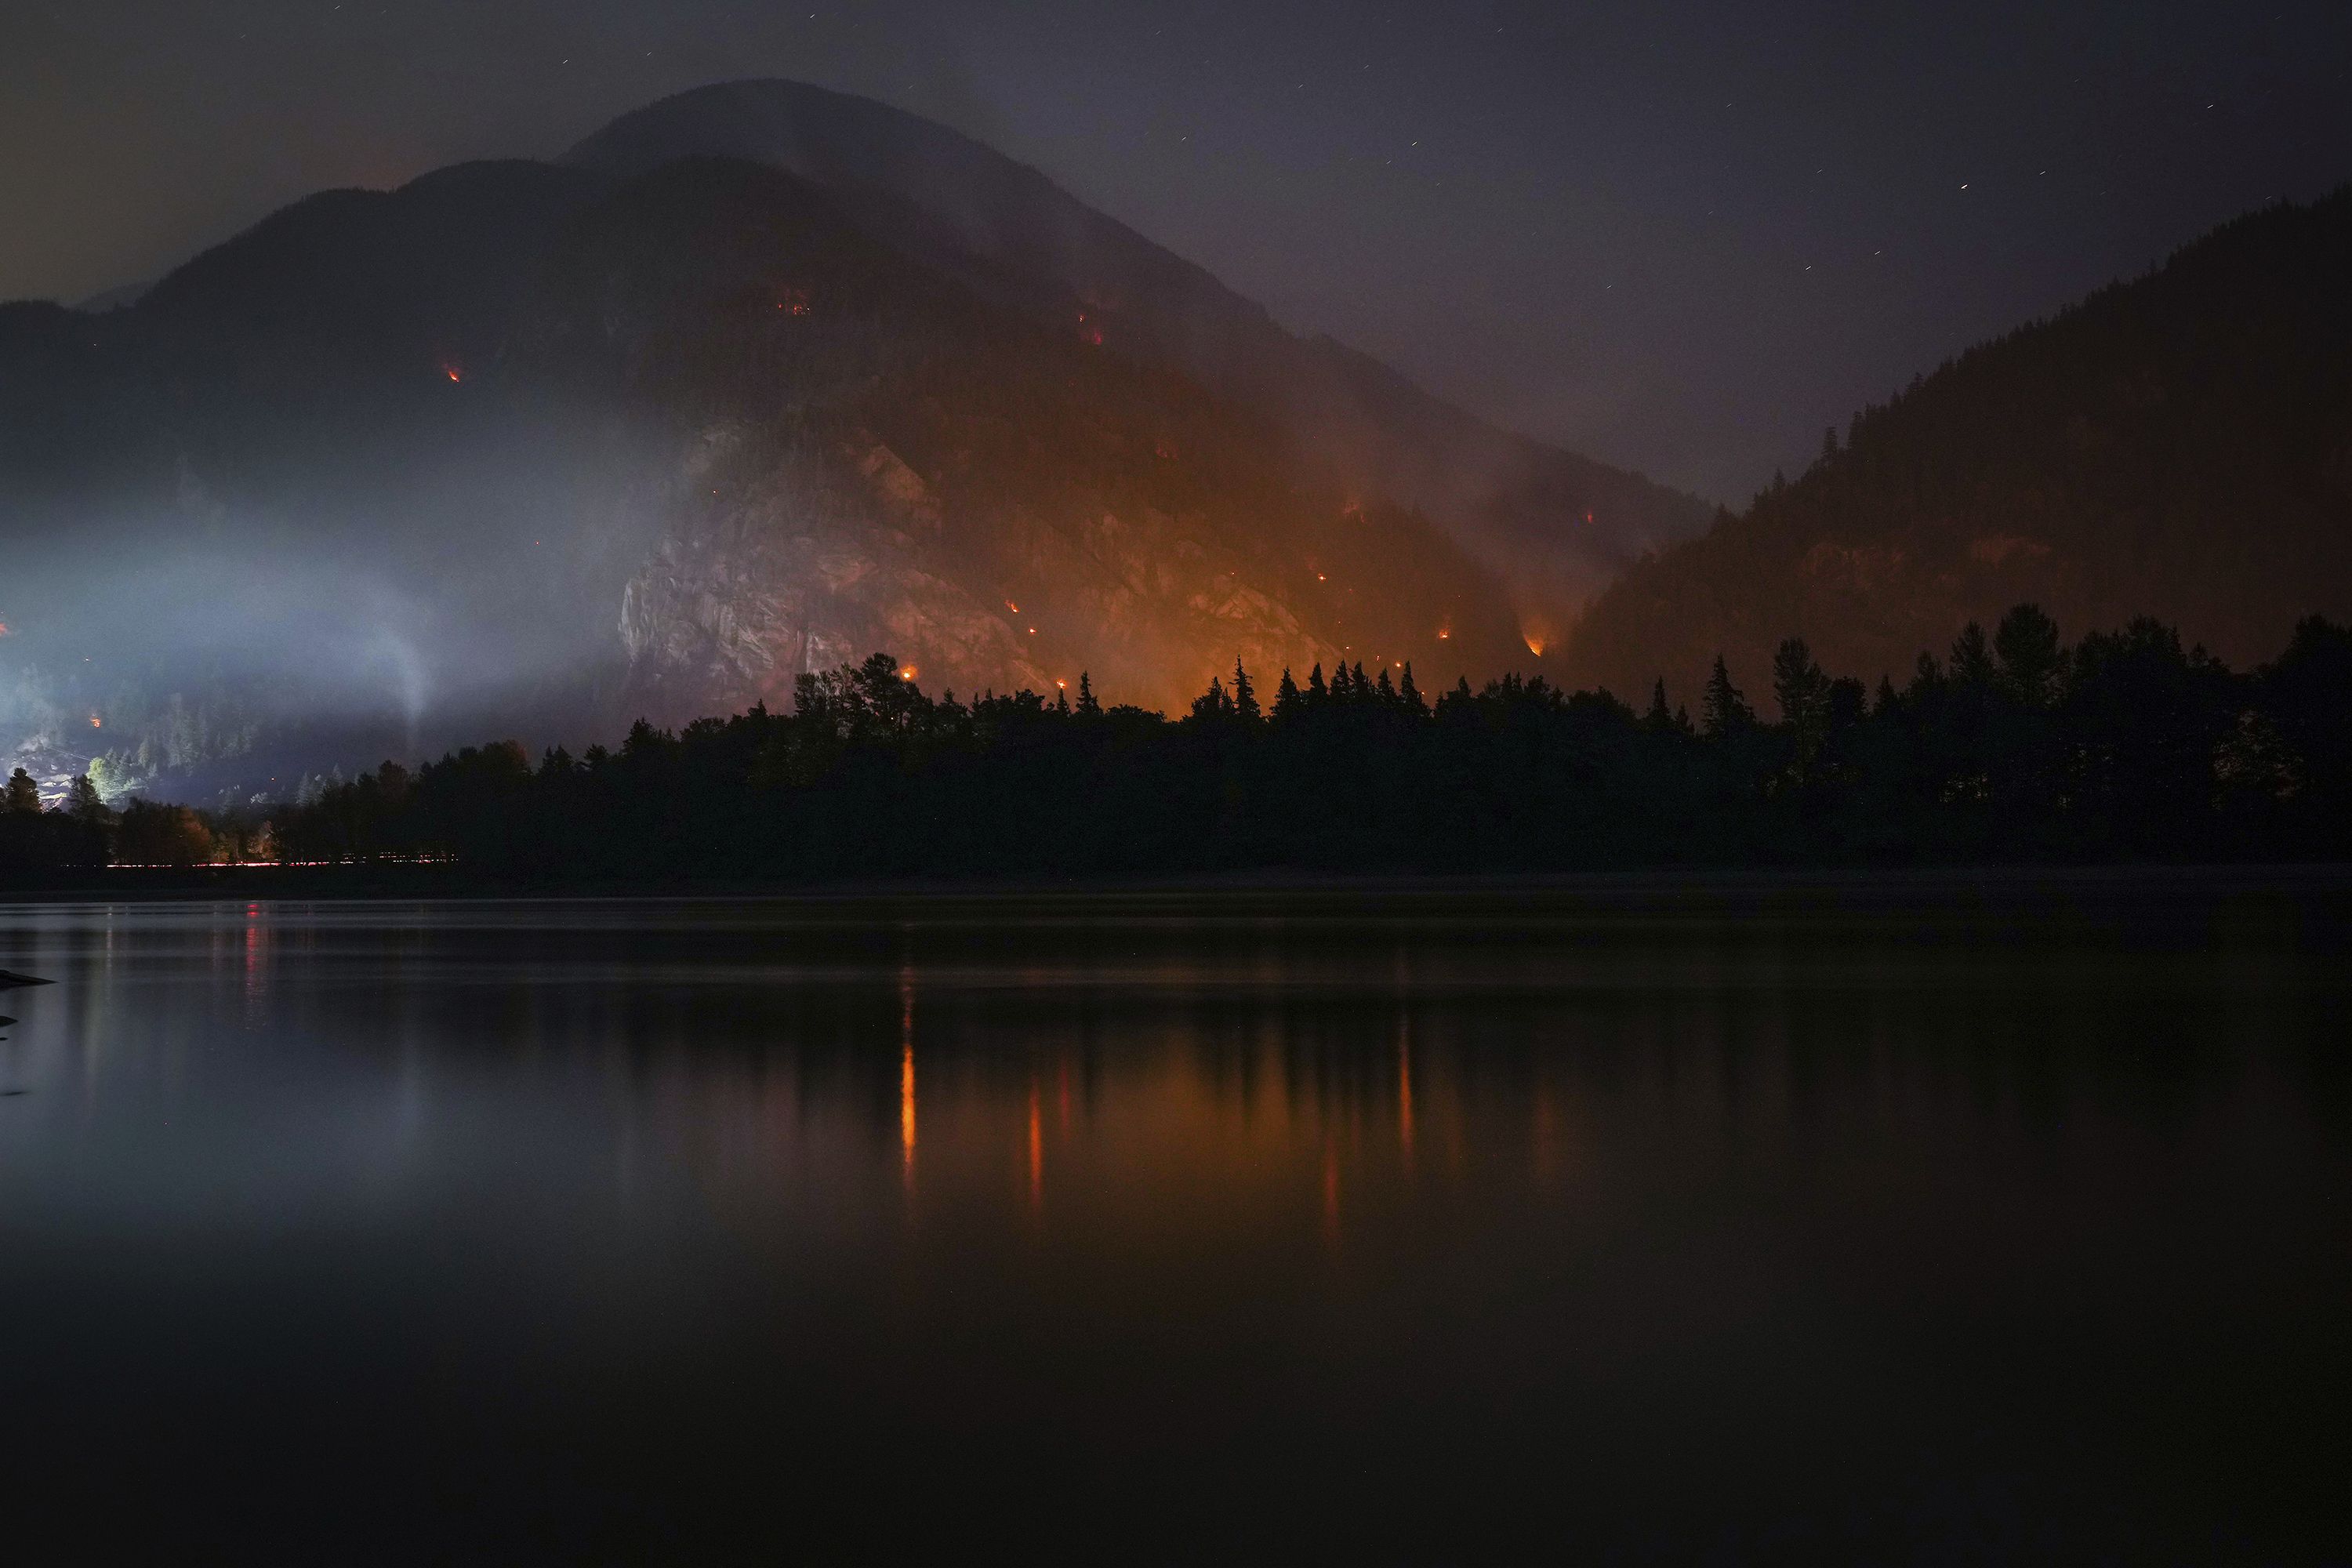 Residents urged to take precautions as wildfire smoke comprises air quality  in parts of B.C.